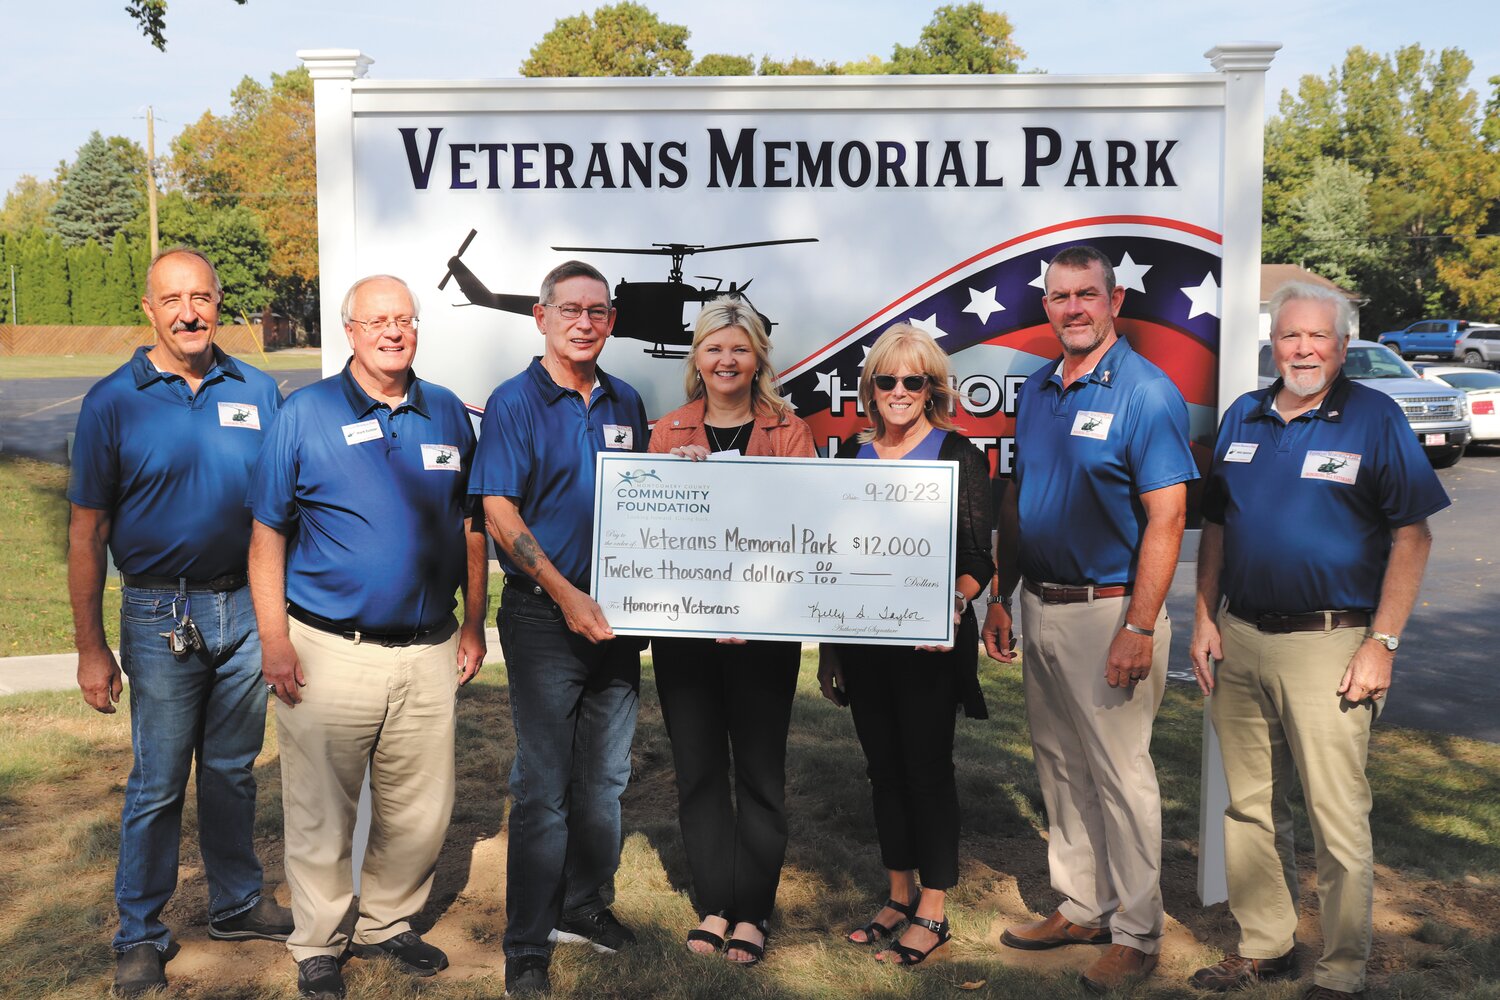 Pictured are Veterans Memorial Park board members, from left, Bob Carstensen, Mark Eutsler, Marc Gabel, Kevin Cobb and Mike Spencer, accepting the check from MCCF staff Kelly Taylor and Cheryl Keim.